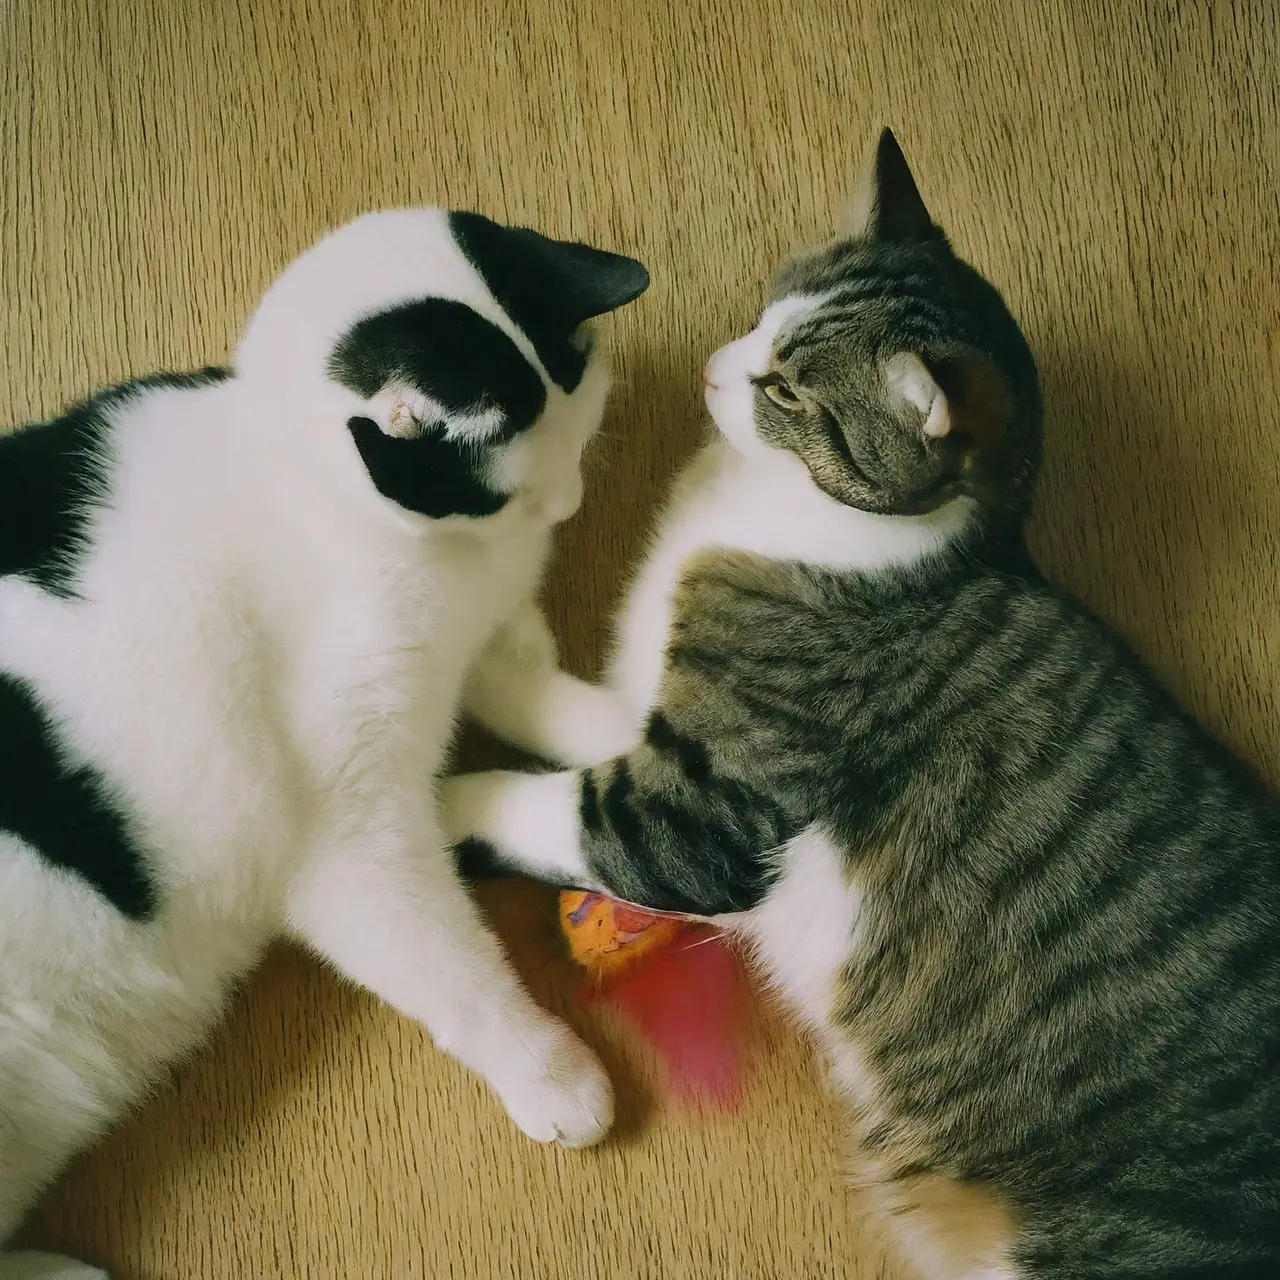 Two cats playing gently with a toy together. 35mm stock photo